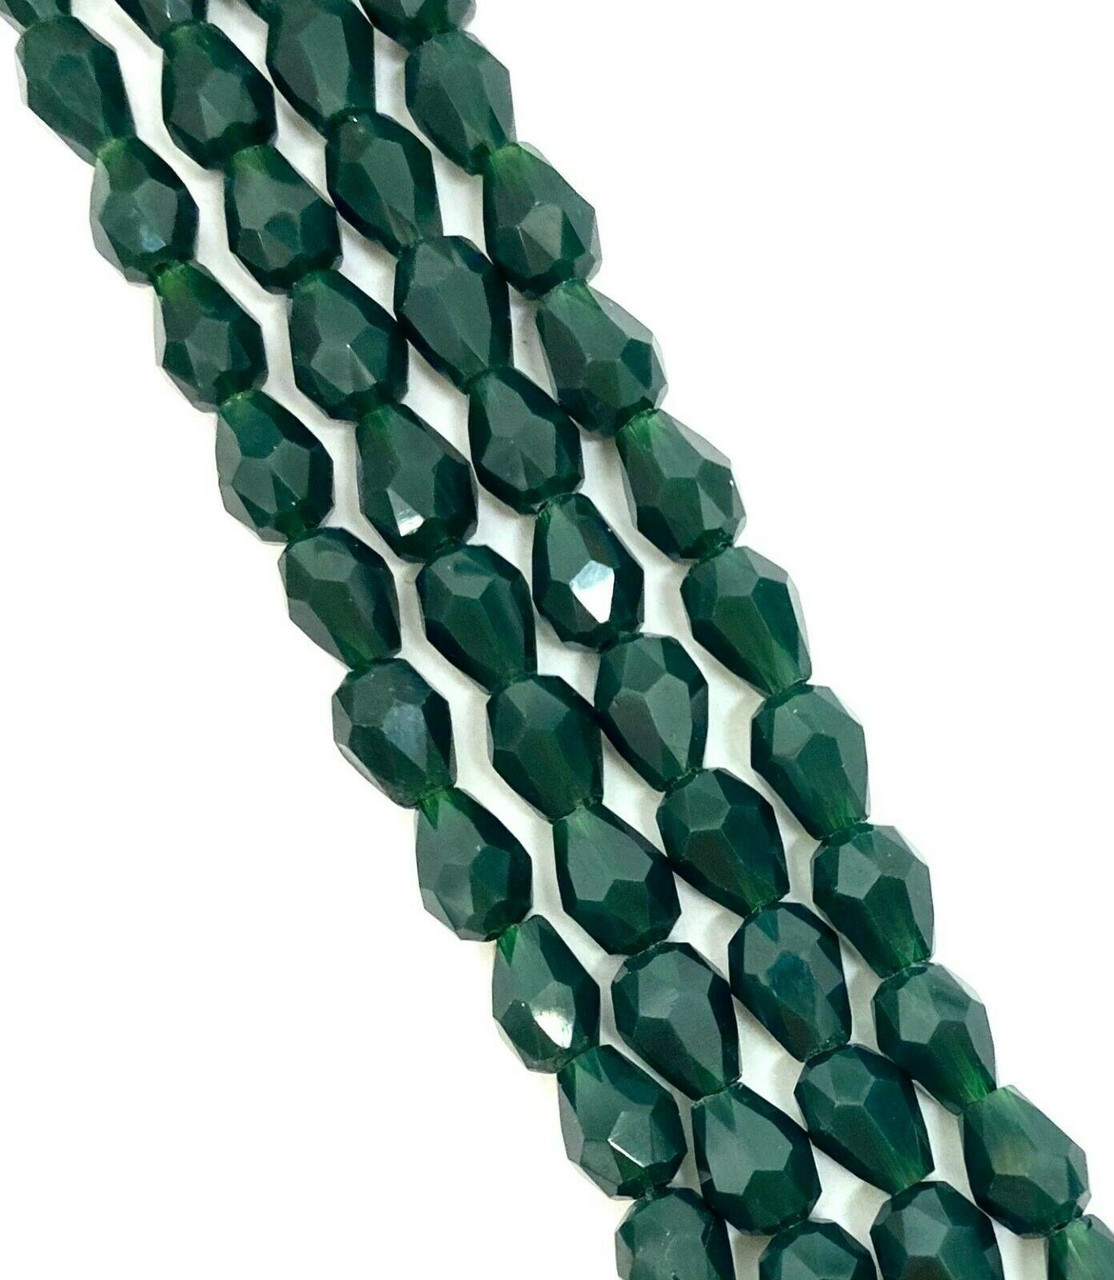 Strand of faceted drop glass beads (briolettes) - approx 6x4mm, Dark Forest Green Opaque, approx 72 beads